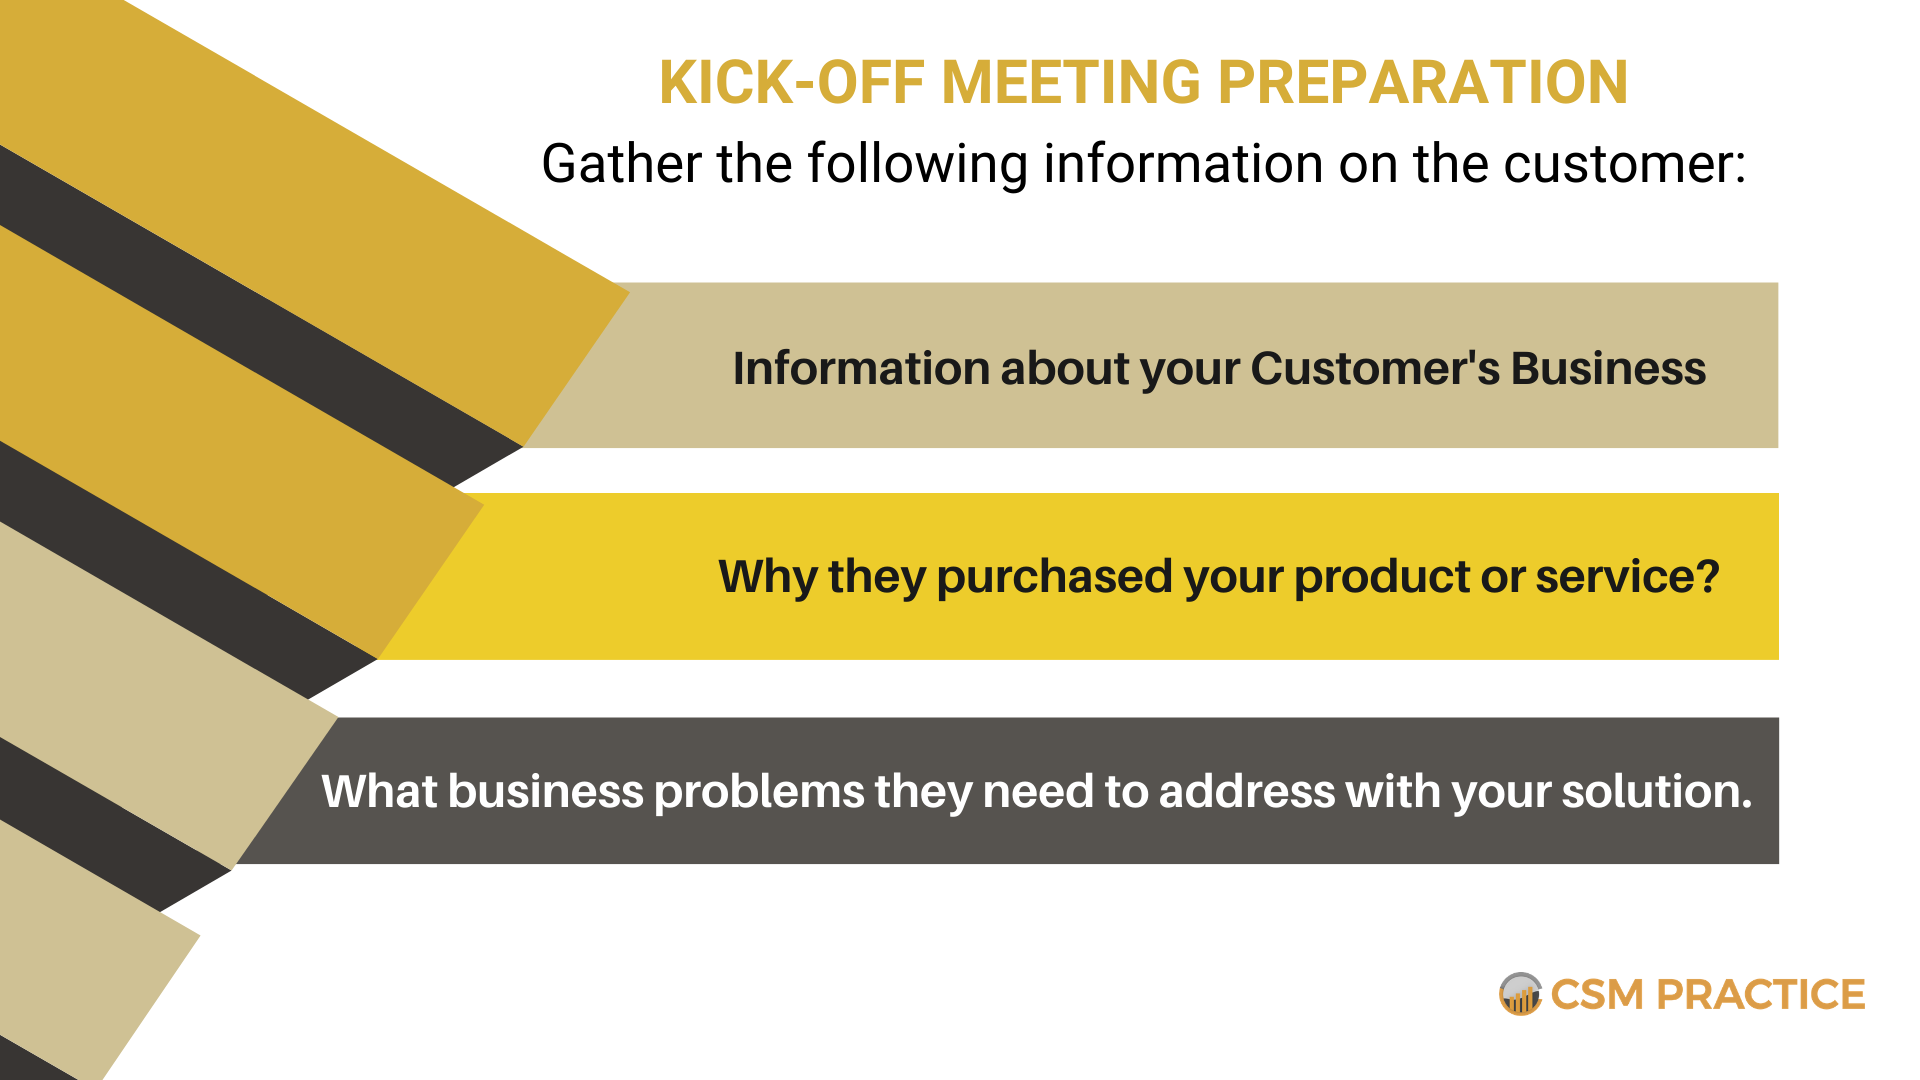 How to Set Your Kick-off Meetings Up for Success - CSM Practice